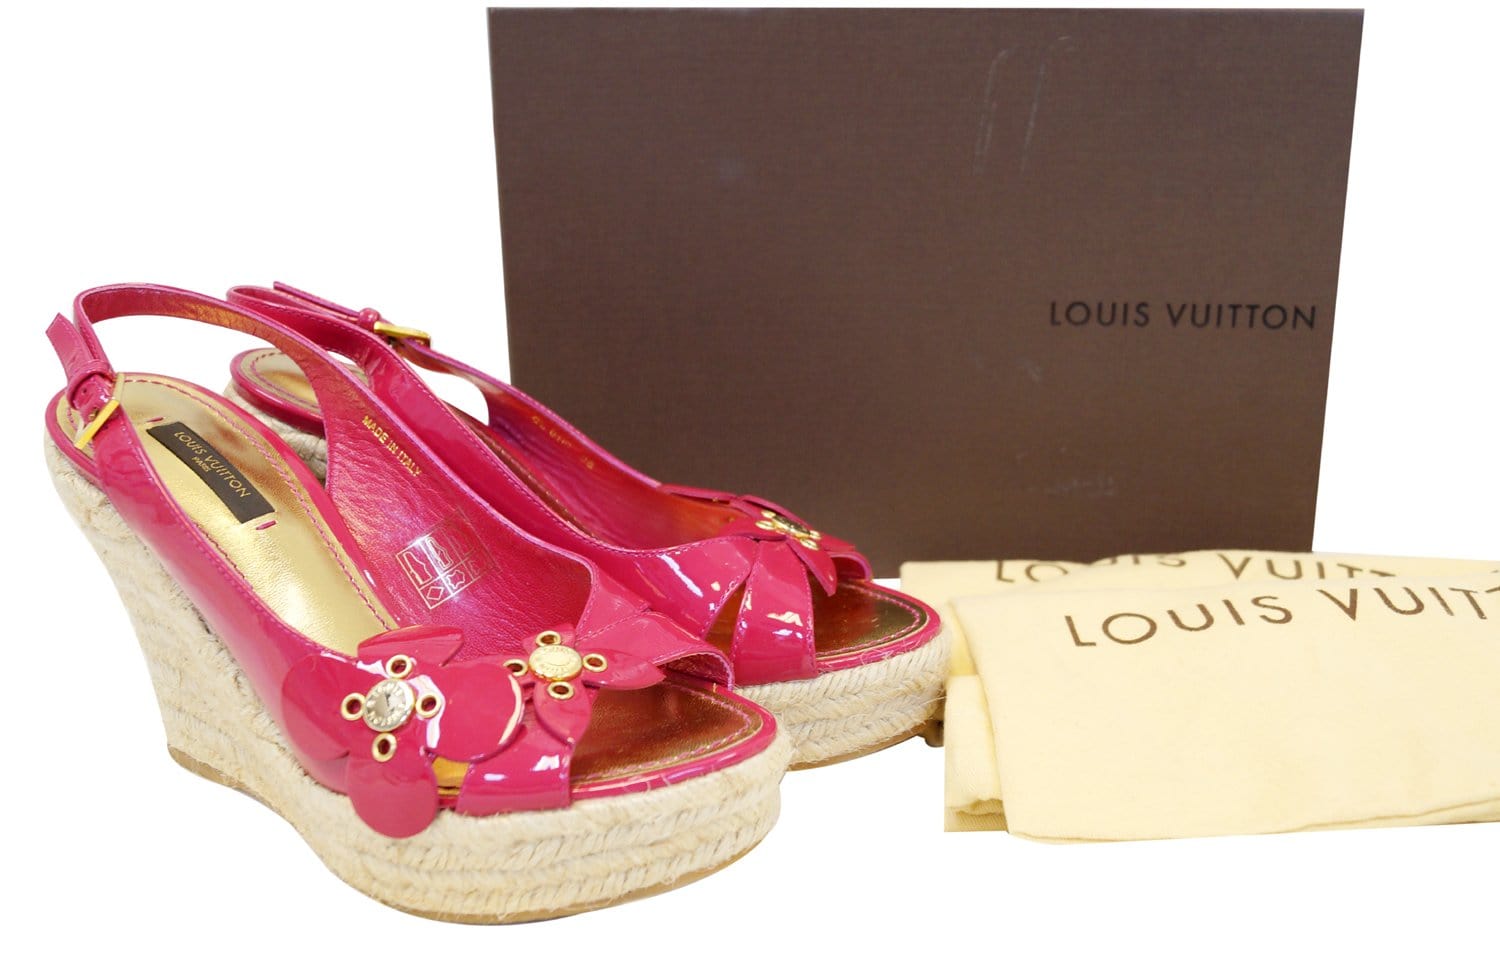 LOUIS VUITTON Patent Leather Floral Embellished Espadrille Wedges - Sa